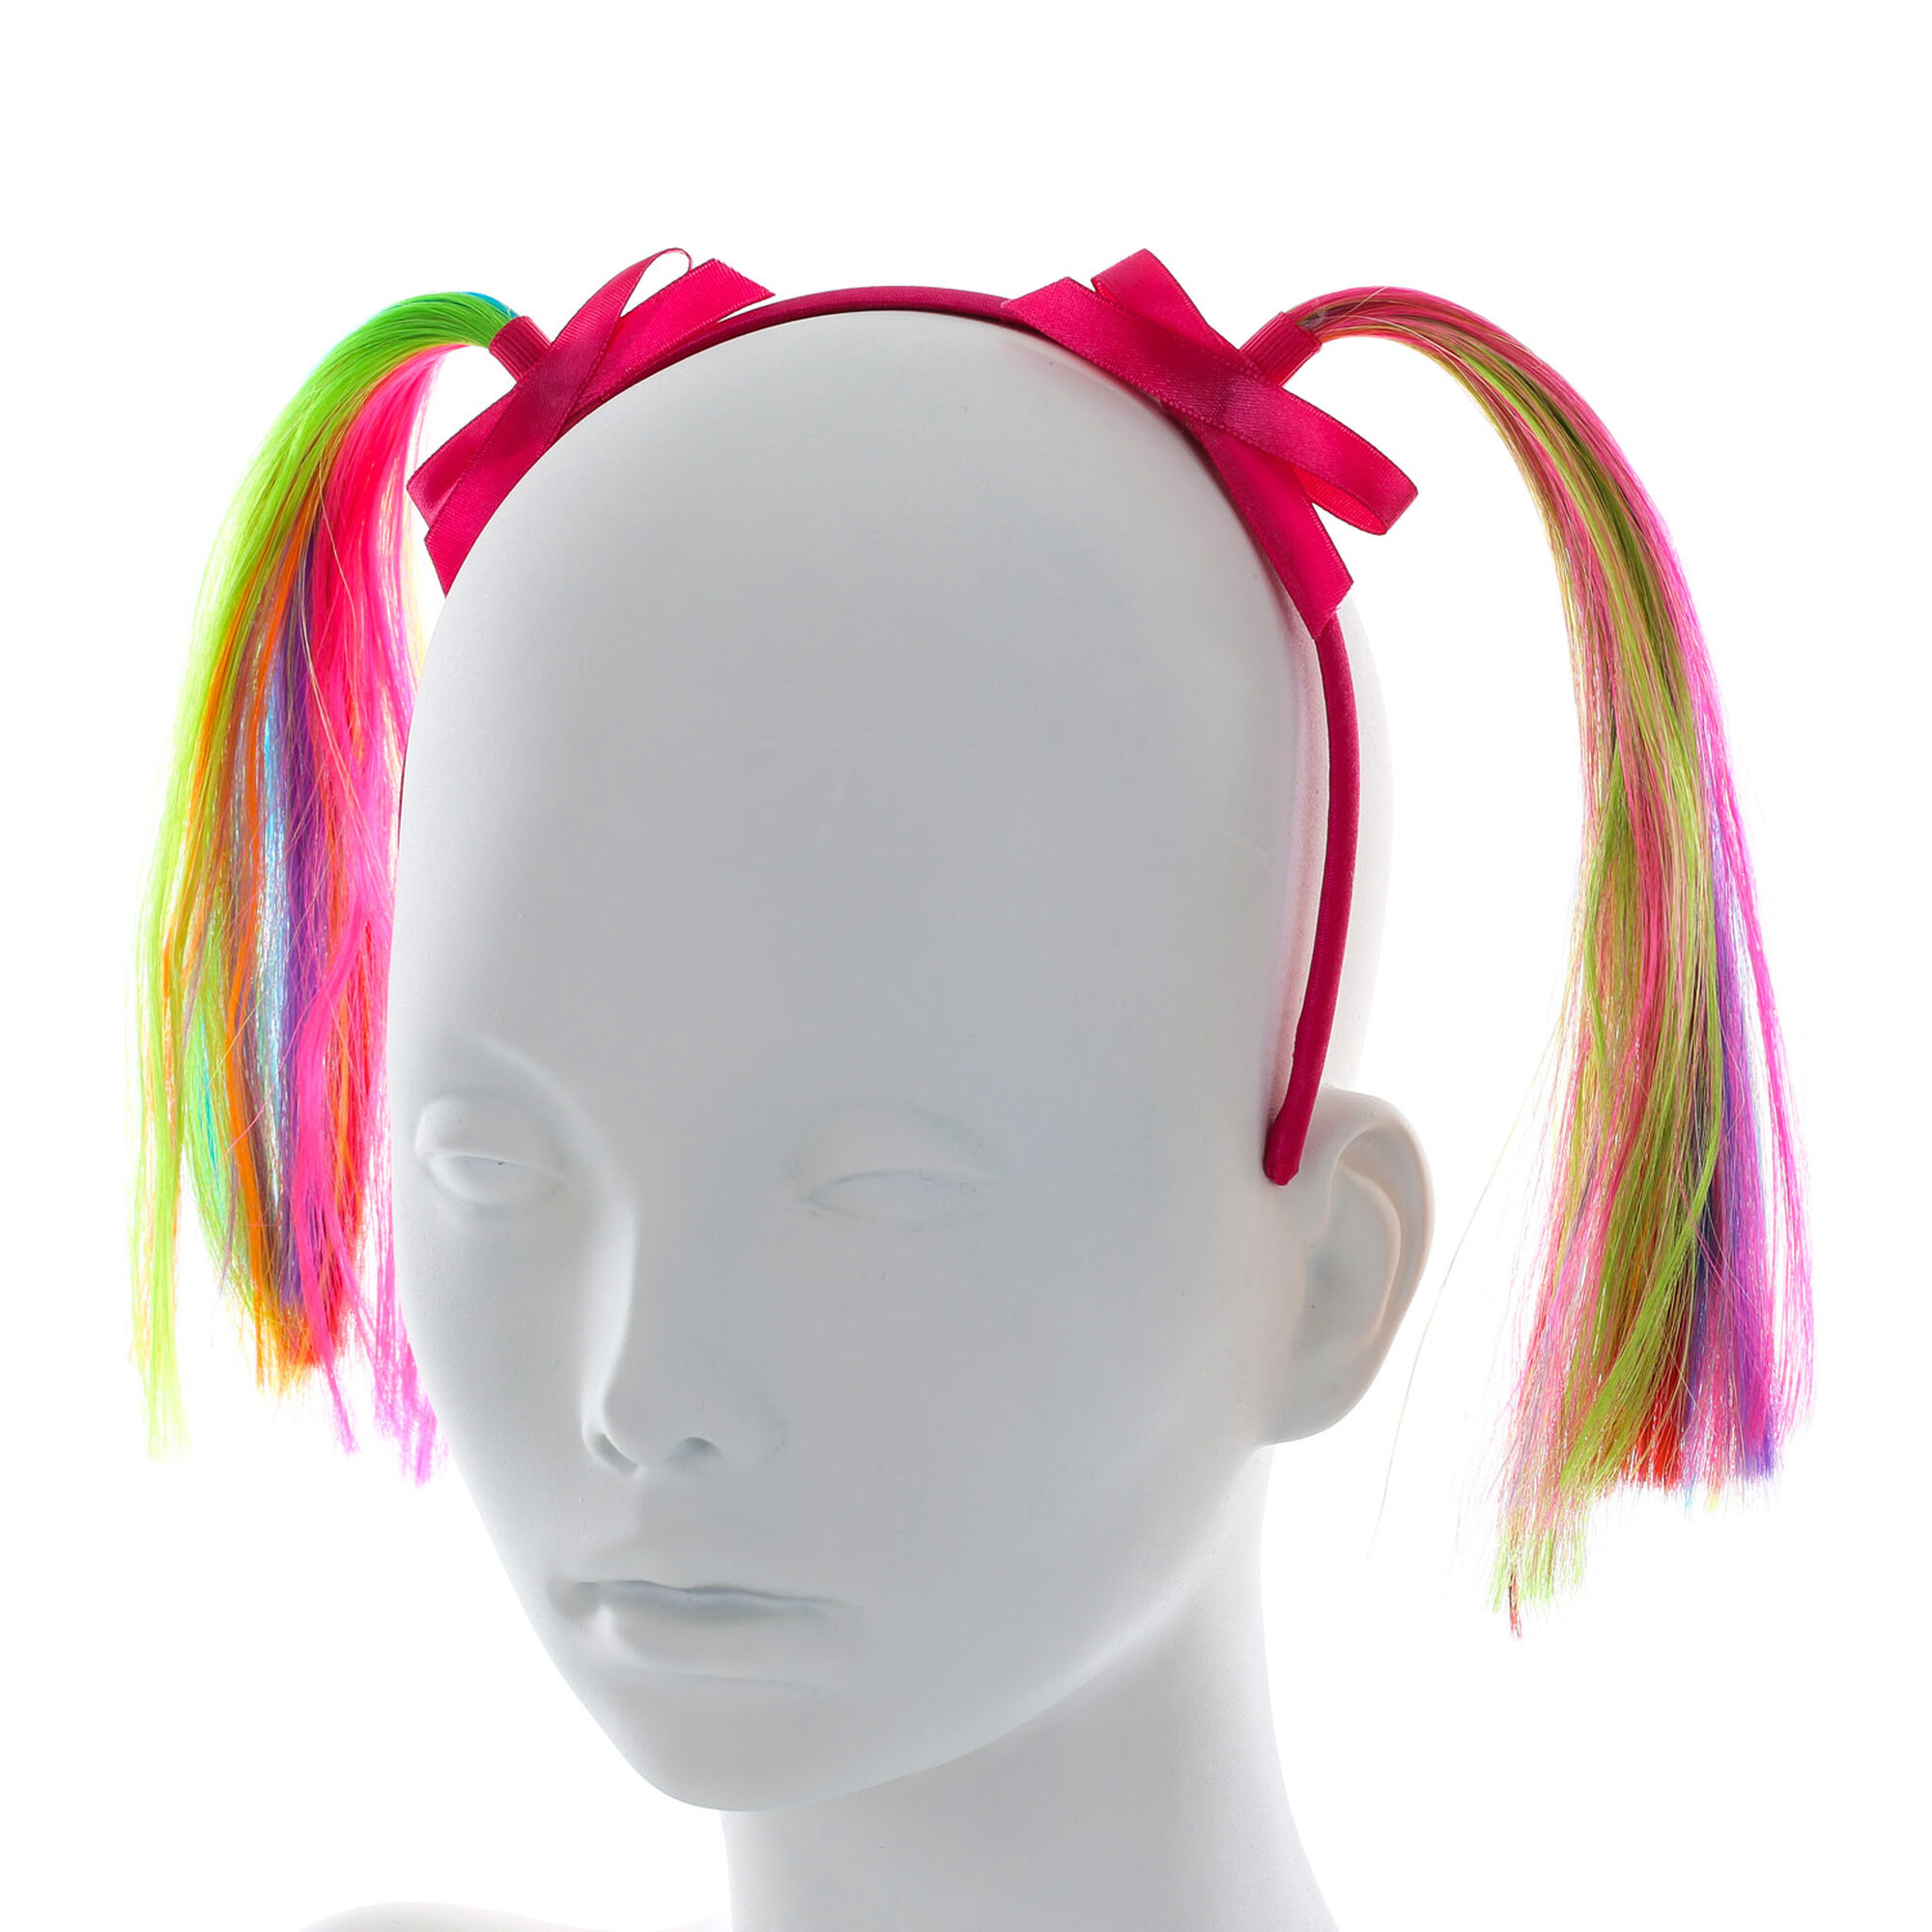 Image of Pigtails with a headband hairstyle